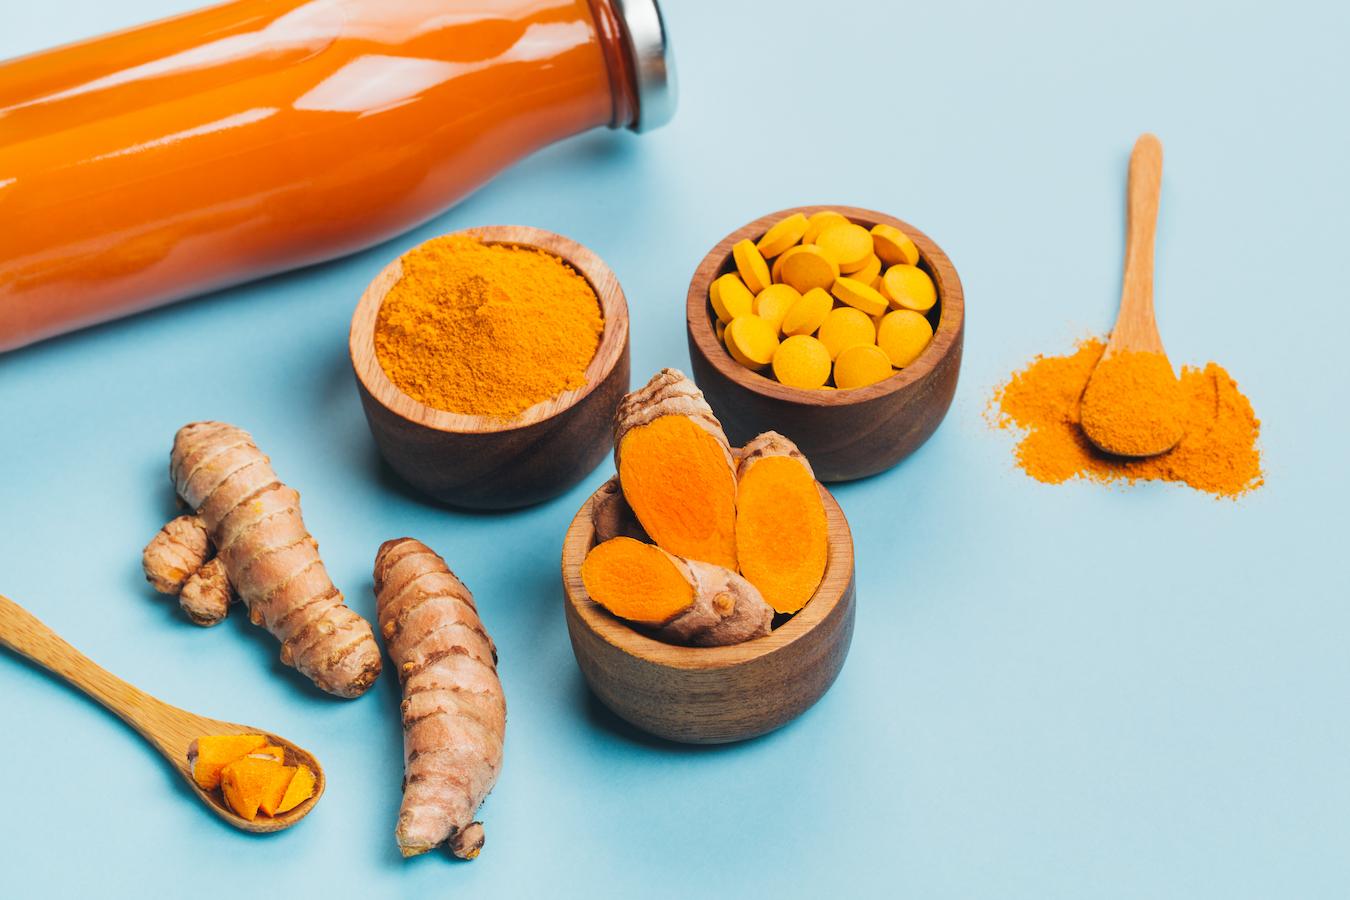 Why is turmeric good for your skin